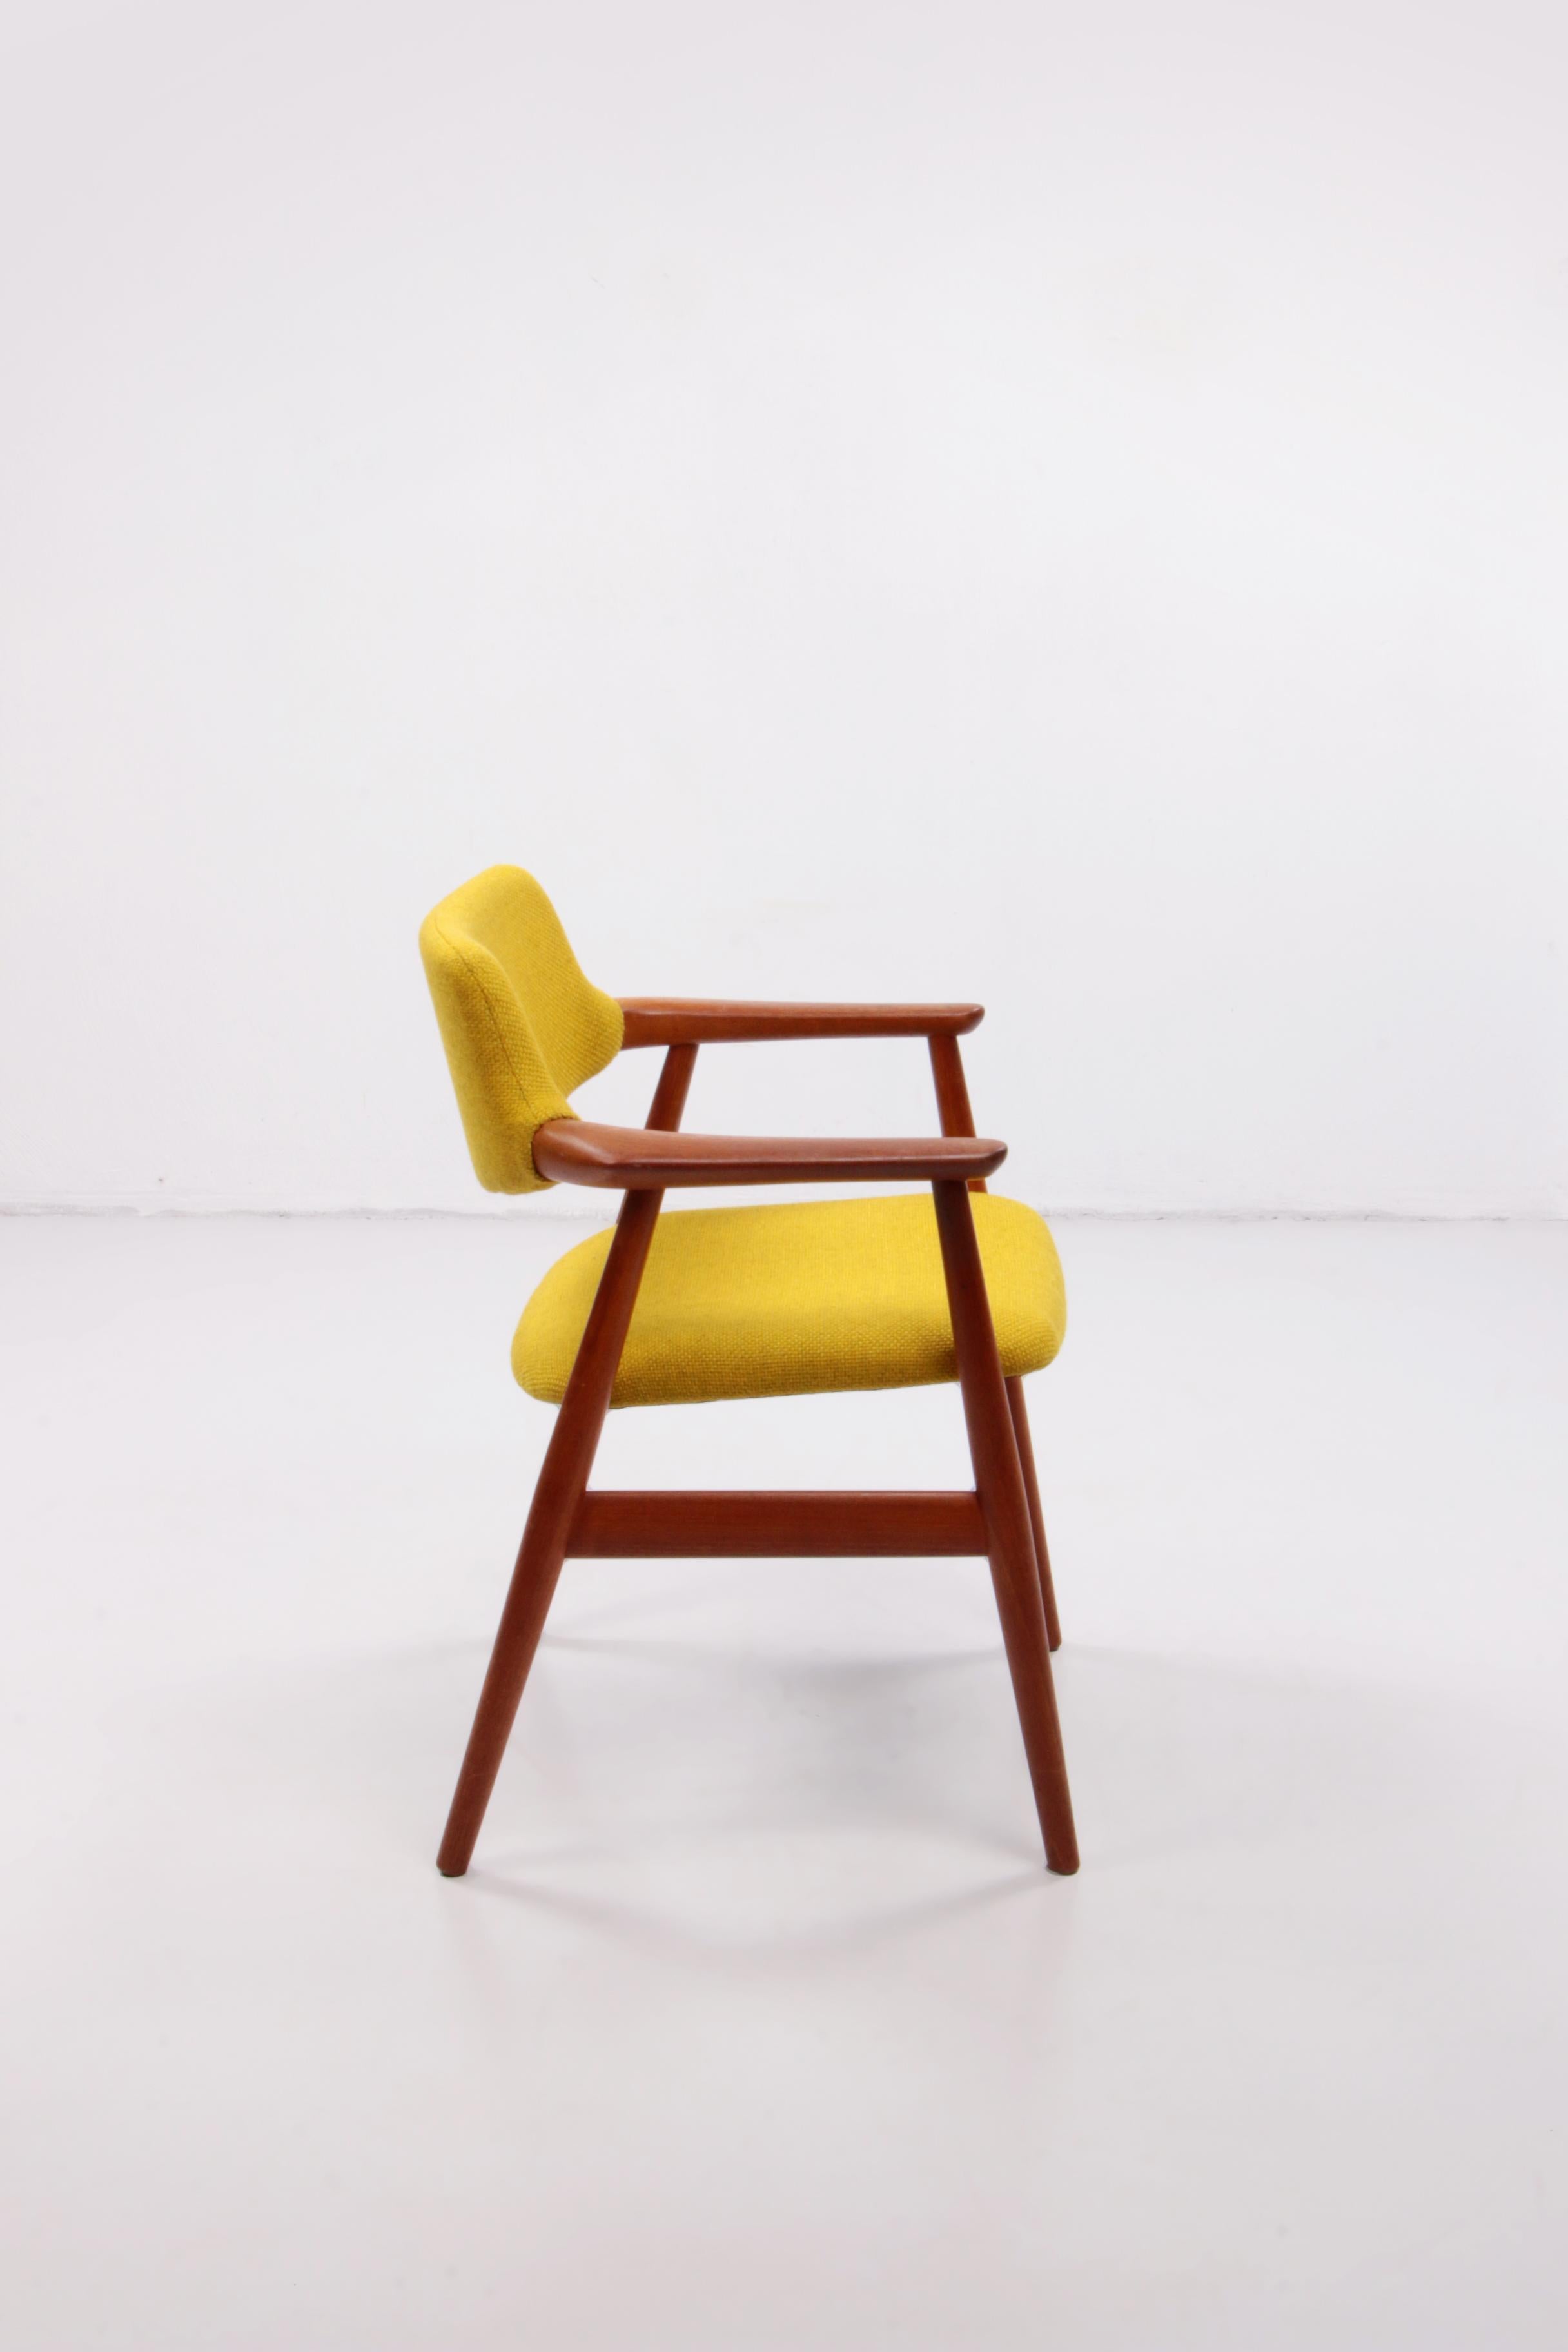 Mid-20th Century Danish Dining Room Chair by Svend Age Eriksen Model Gm11, 1960s